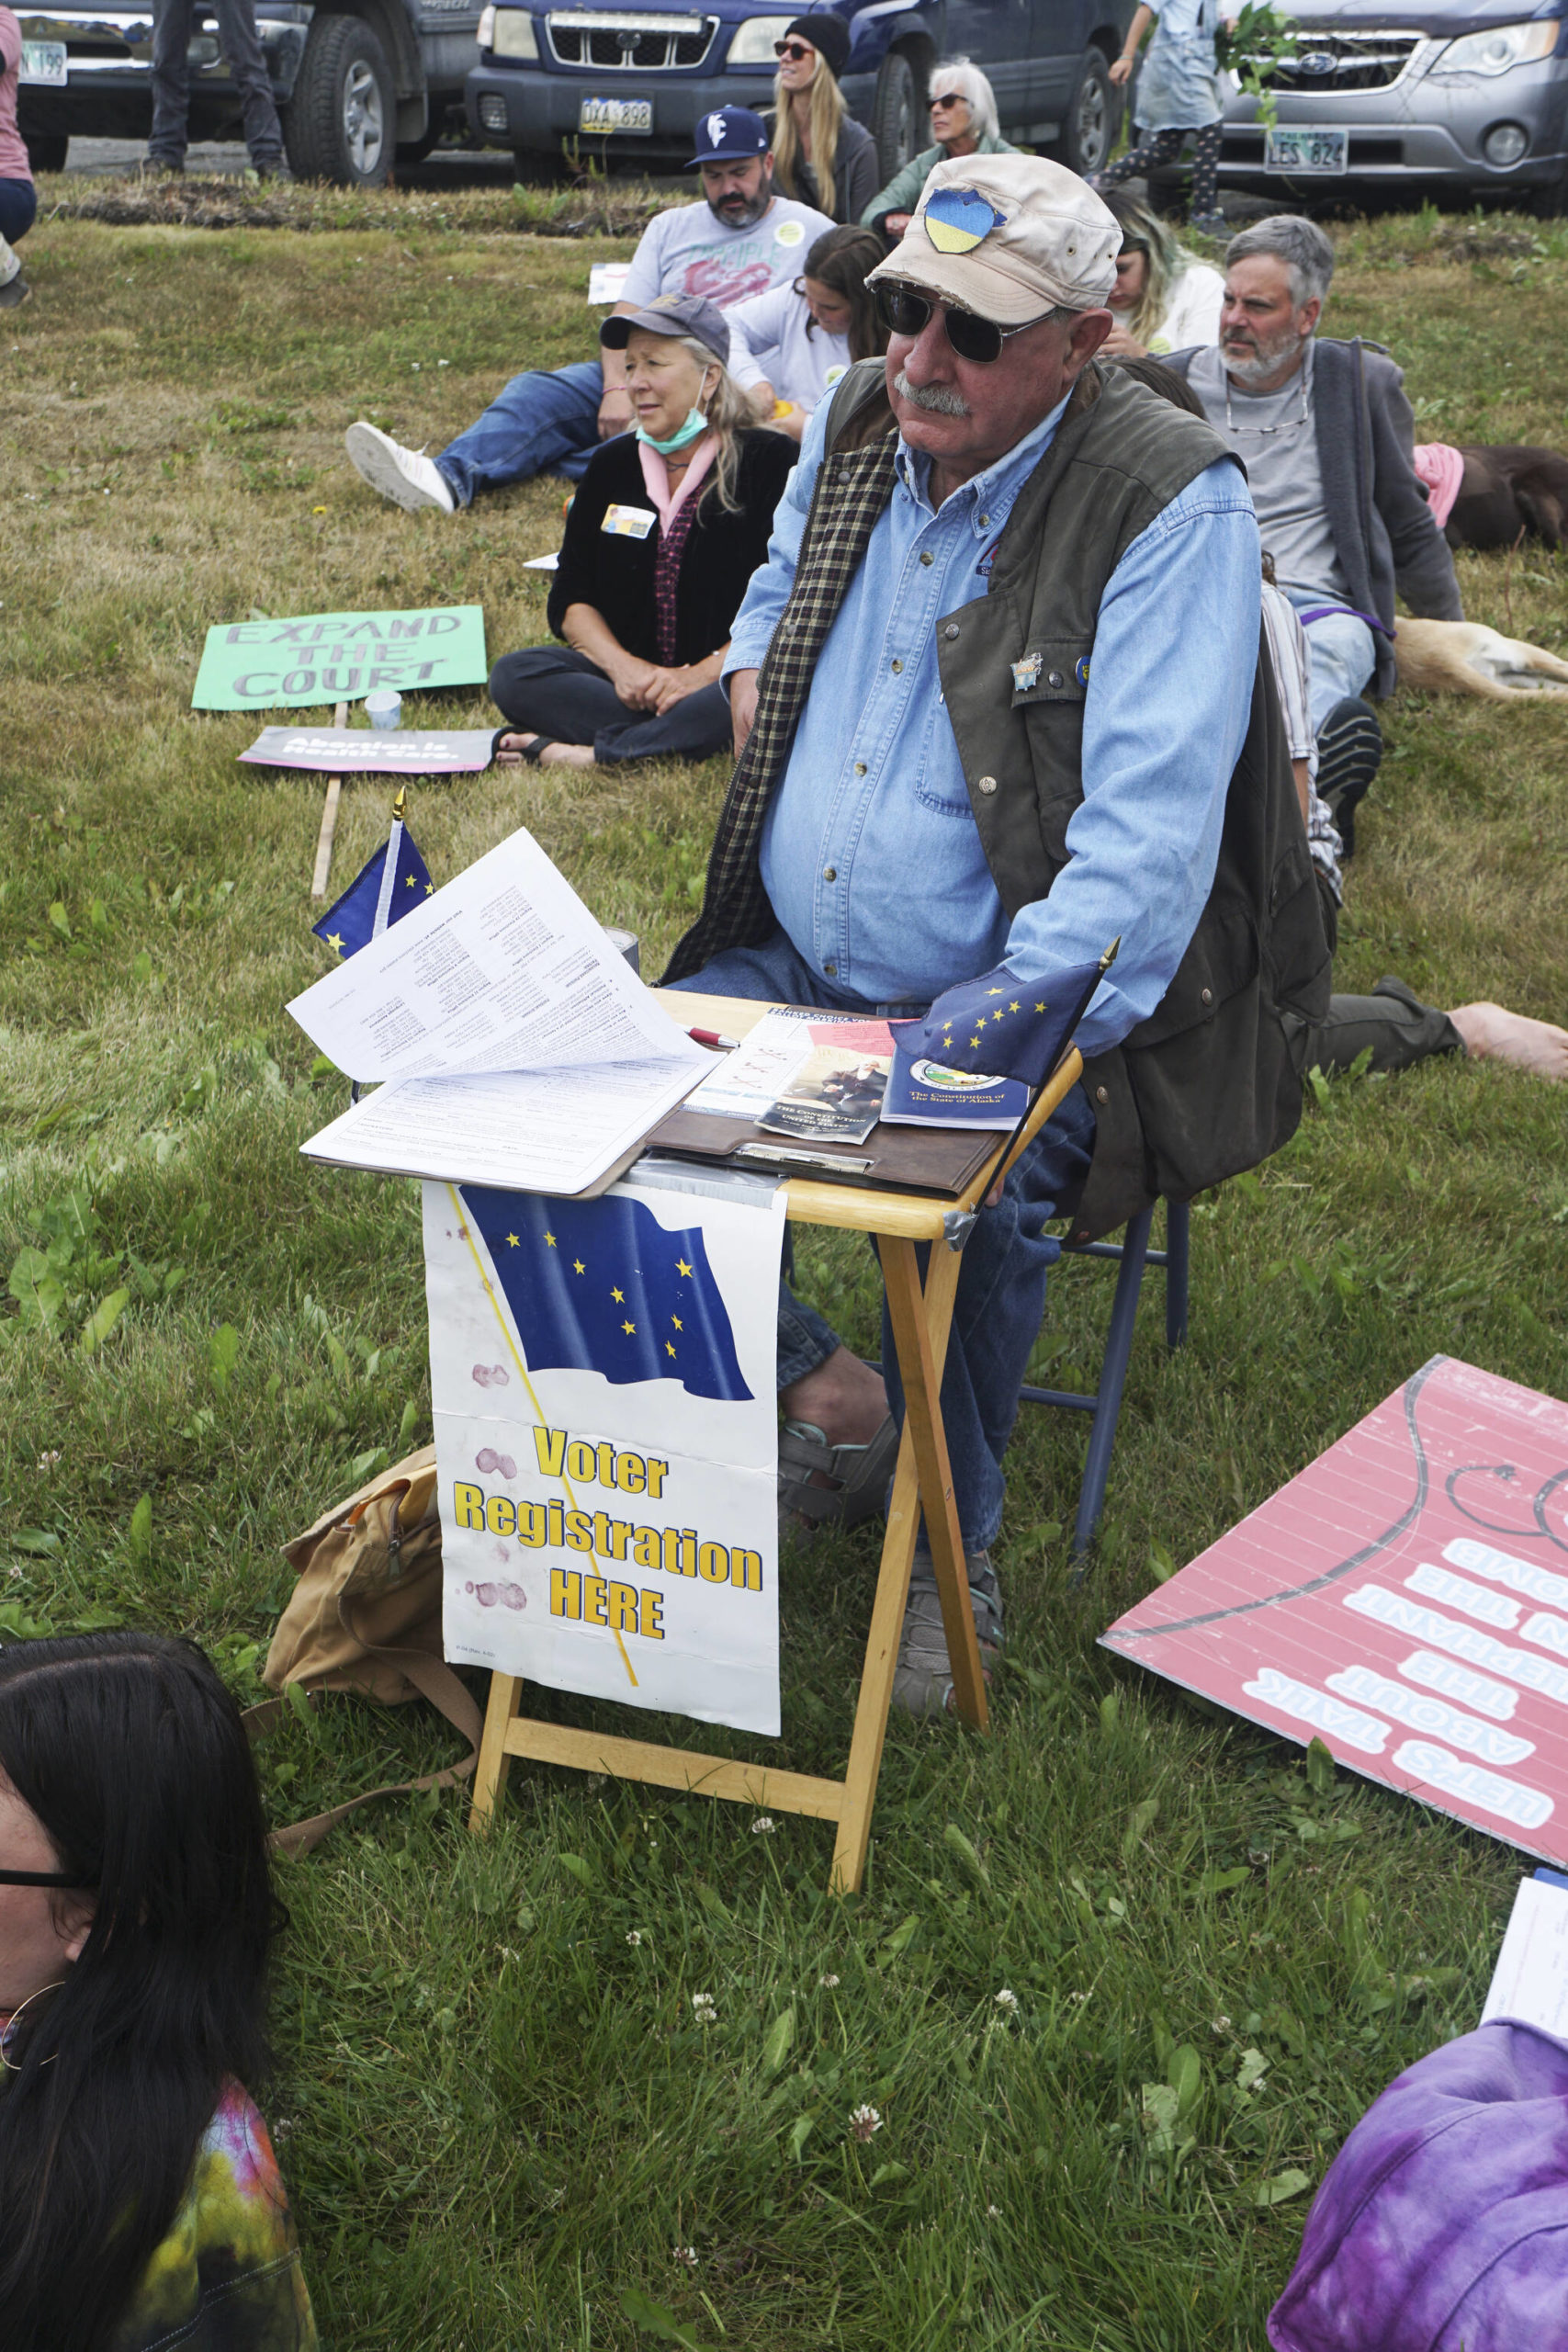 Ken Landfield staffs a voter registration table on Saturday, July 9, 2022, during the “Bans off our bodies” march and protest at WKFL Park in Homer, Alaska. (Photo by Michael Armstrong/Homer News)